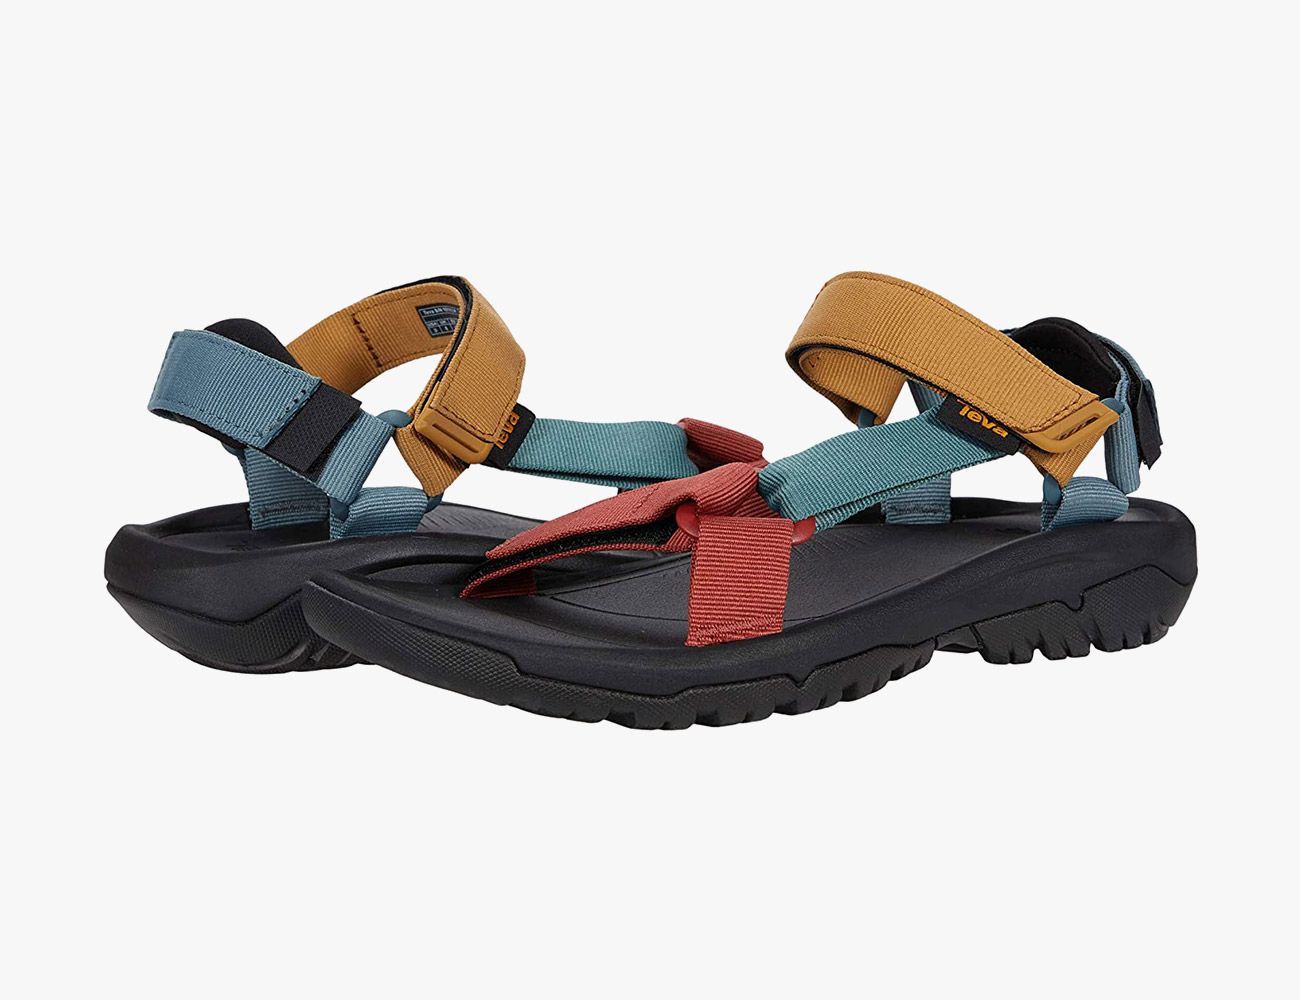 Chaco Teva: Which Sandals Should Buy?